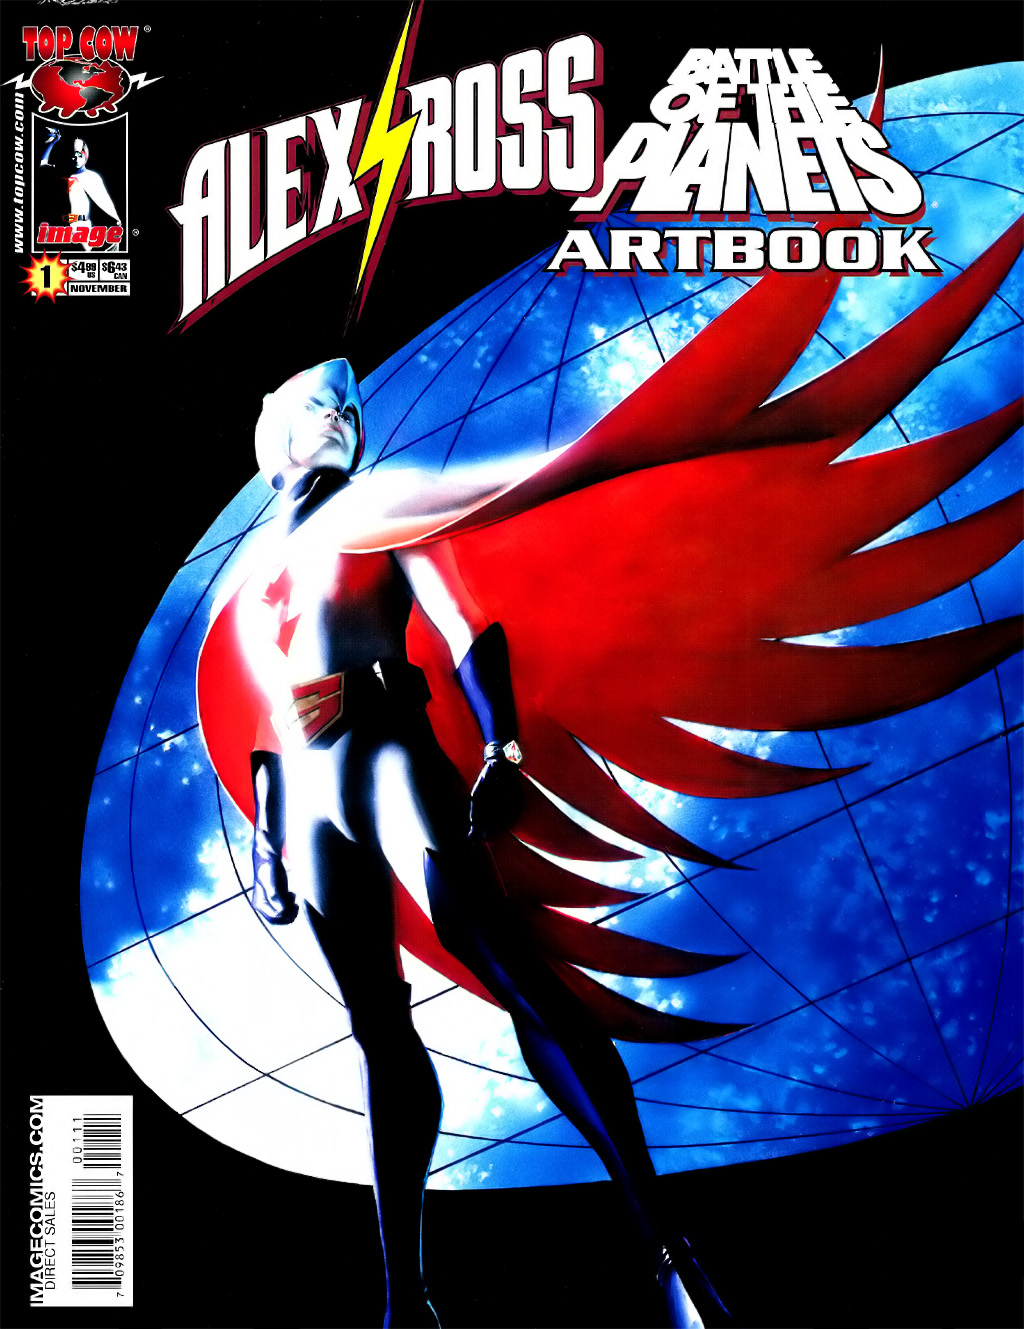 Read online Alex Ross: Battle of the Planets Artbook comic -  Issue # Full - 1